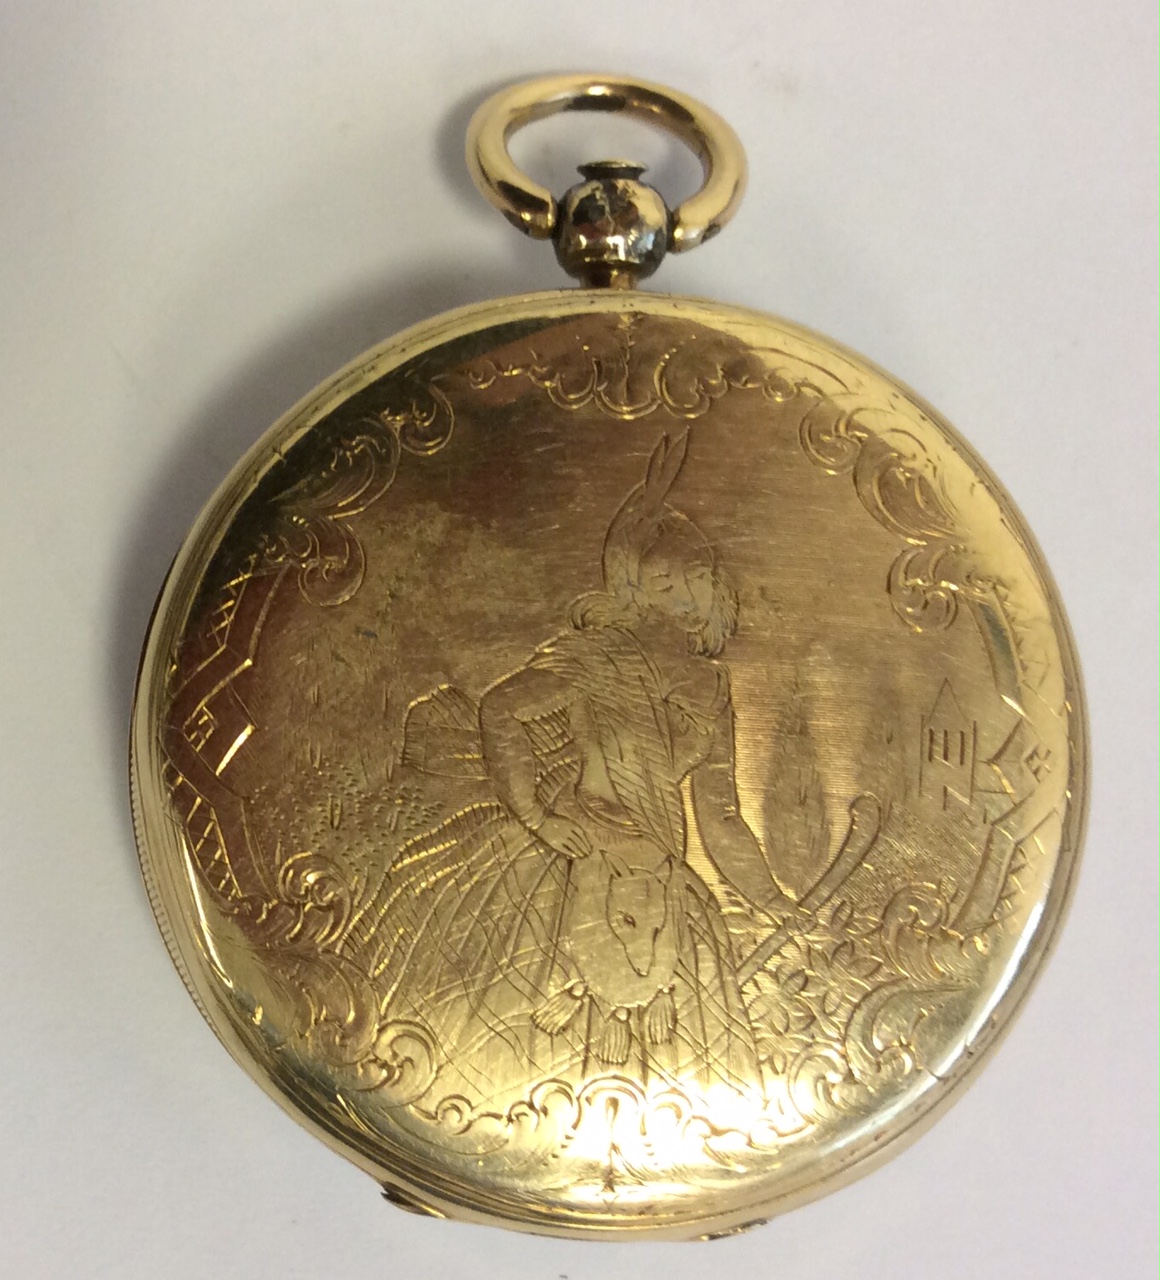 PATECH, GENEVE, A CONTINENTAL GOLD LADIES' POCKET WATCH The case engraved with a scene of a young